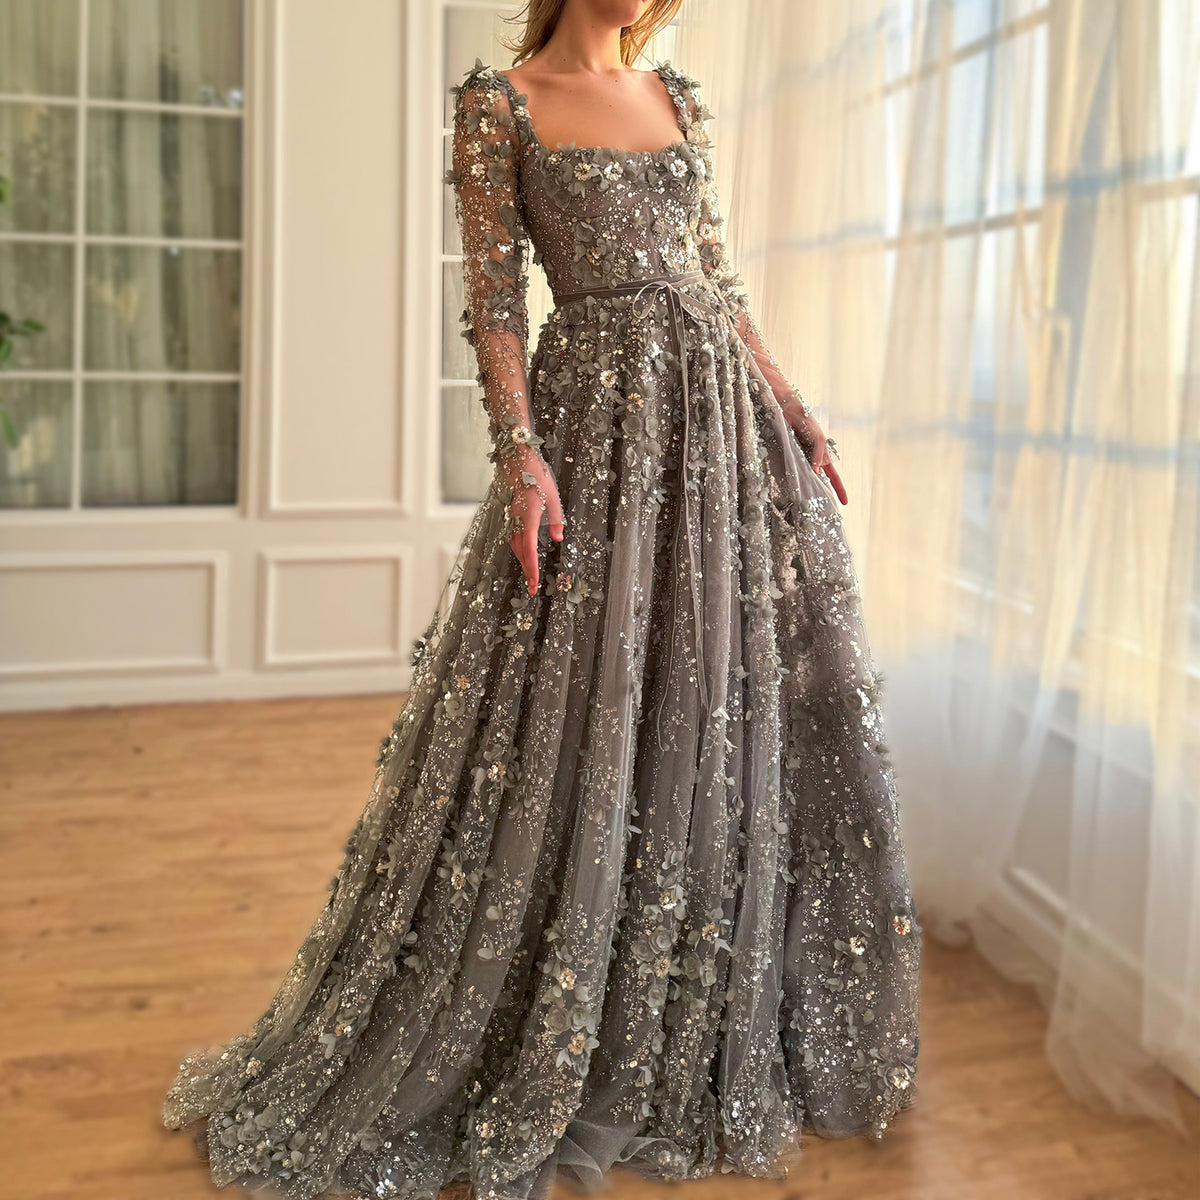 Sharon Said Luxury 3D Flower Gray Long Sleeves Evening Dresses for Women Wedding Party Elegant Arabic A-line Formal Gowns SS353